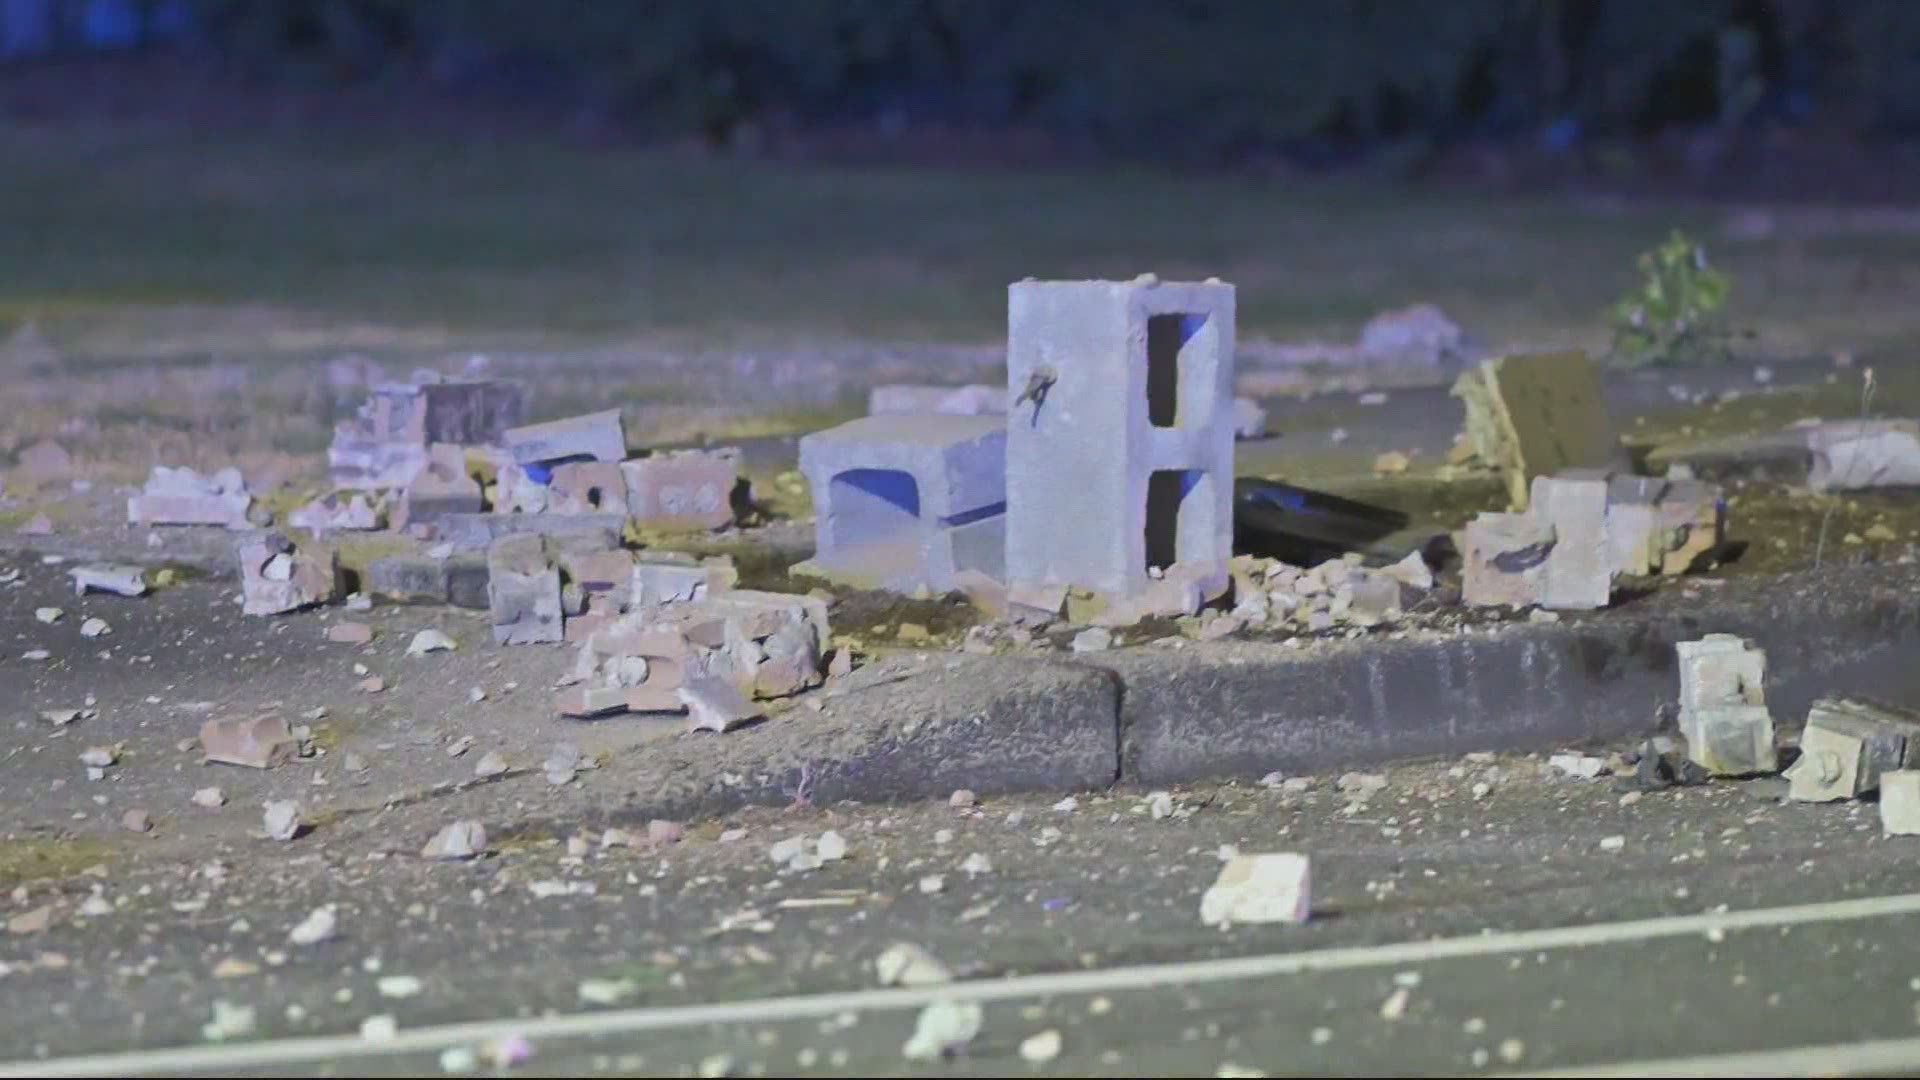 Portland police are looking into explosions that destroyed a lending library and a mailbox in two separate neighborhoods.